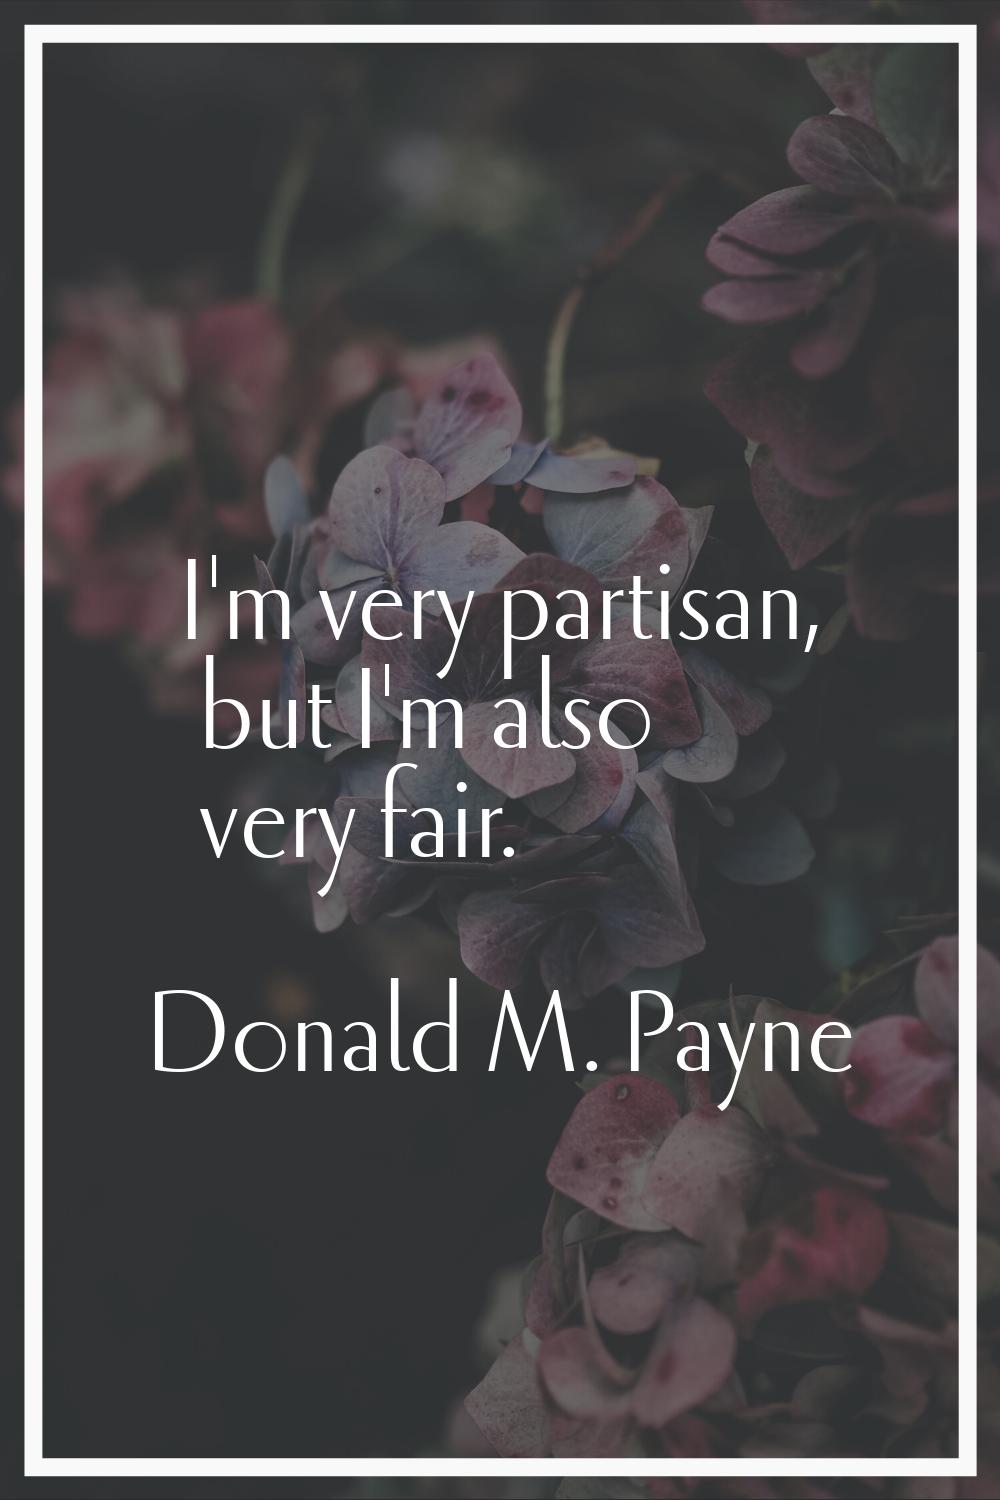 I'm very partisan, but I'm also very fair.